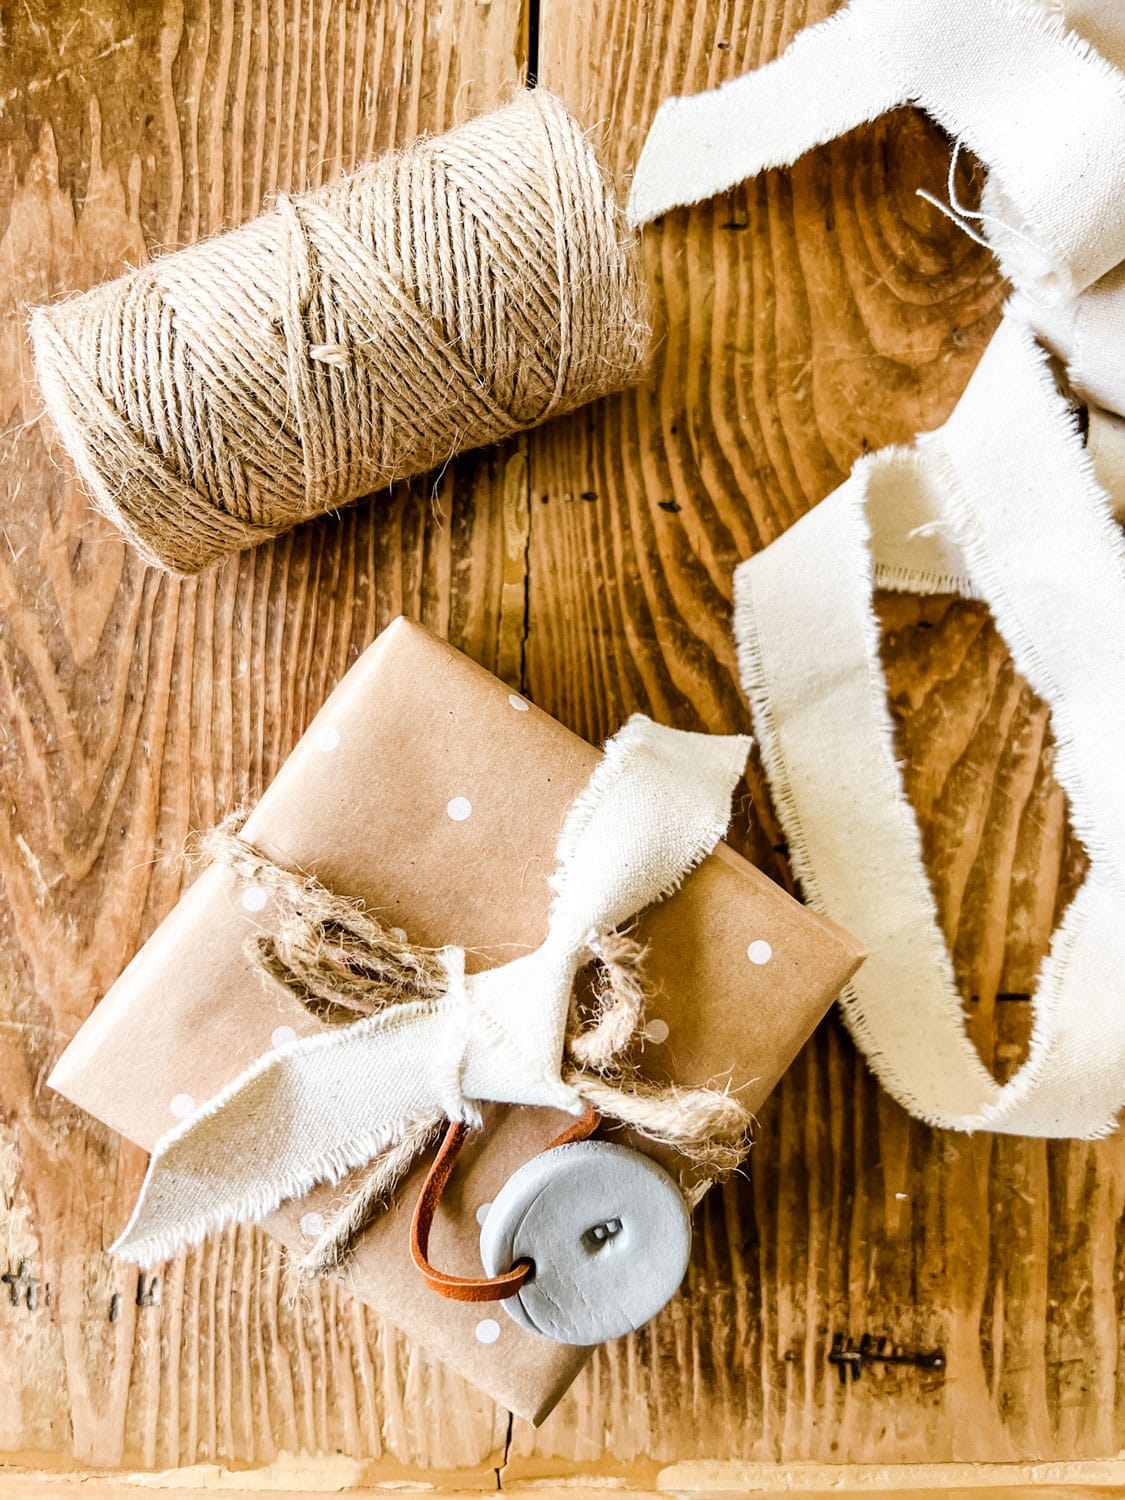 How to Make Frayed Ribbon From Fabric or Canvas